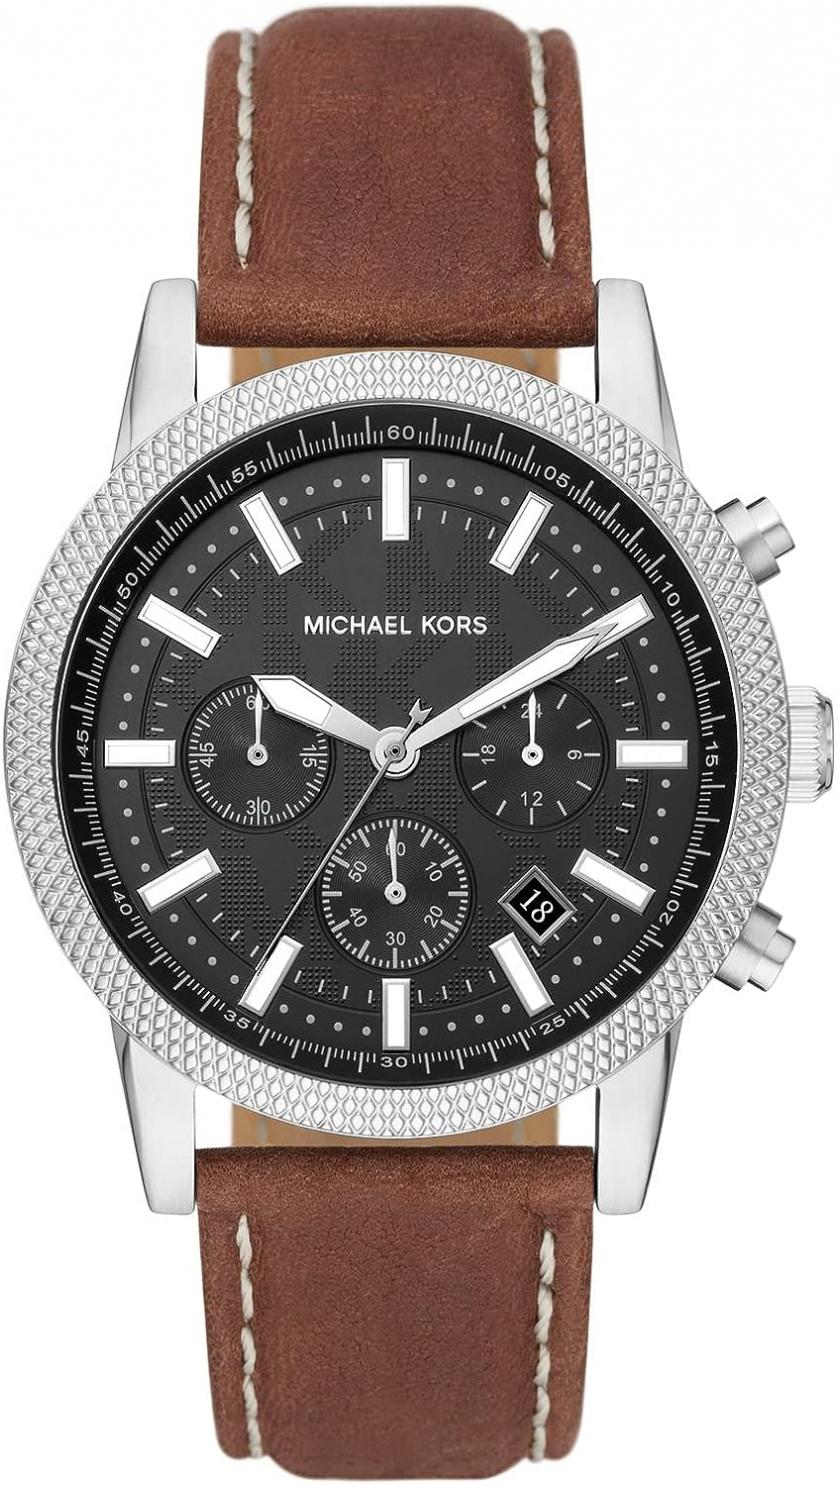 Michael Kors Men's Hutton Chronograph Watch with Leather or Steel Band